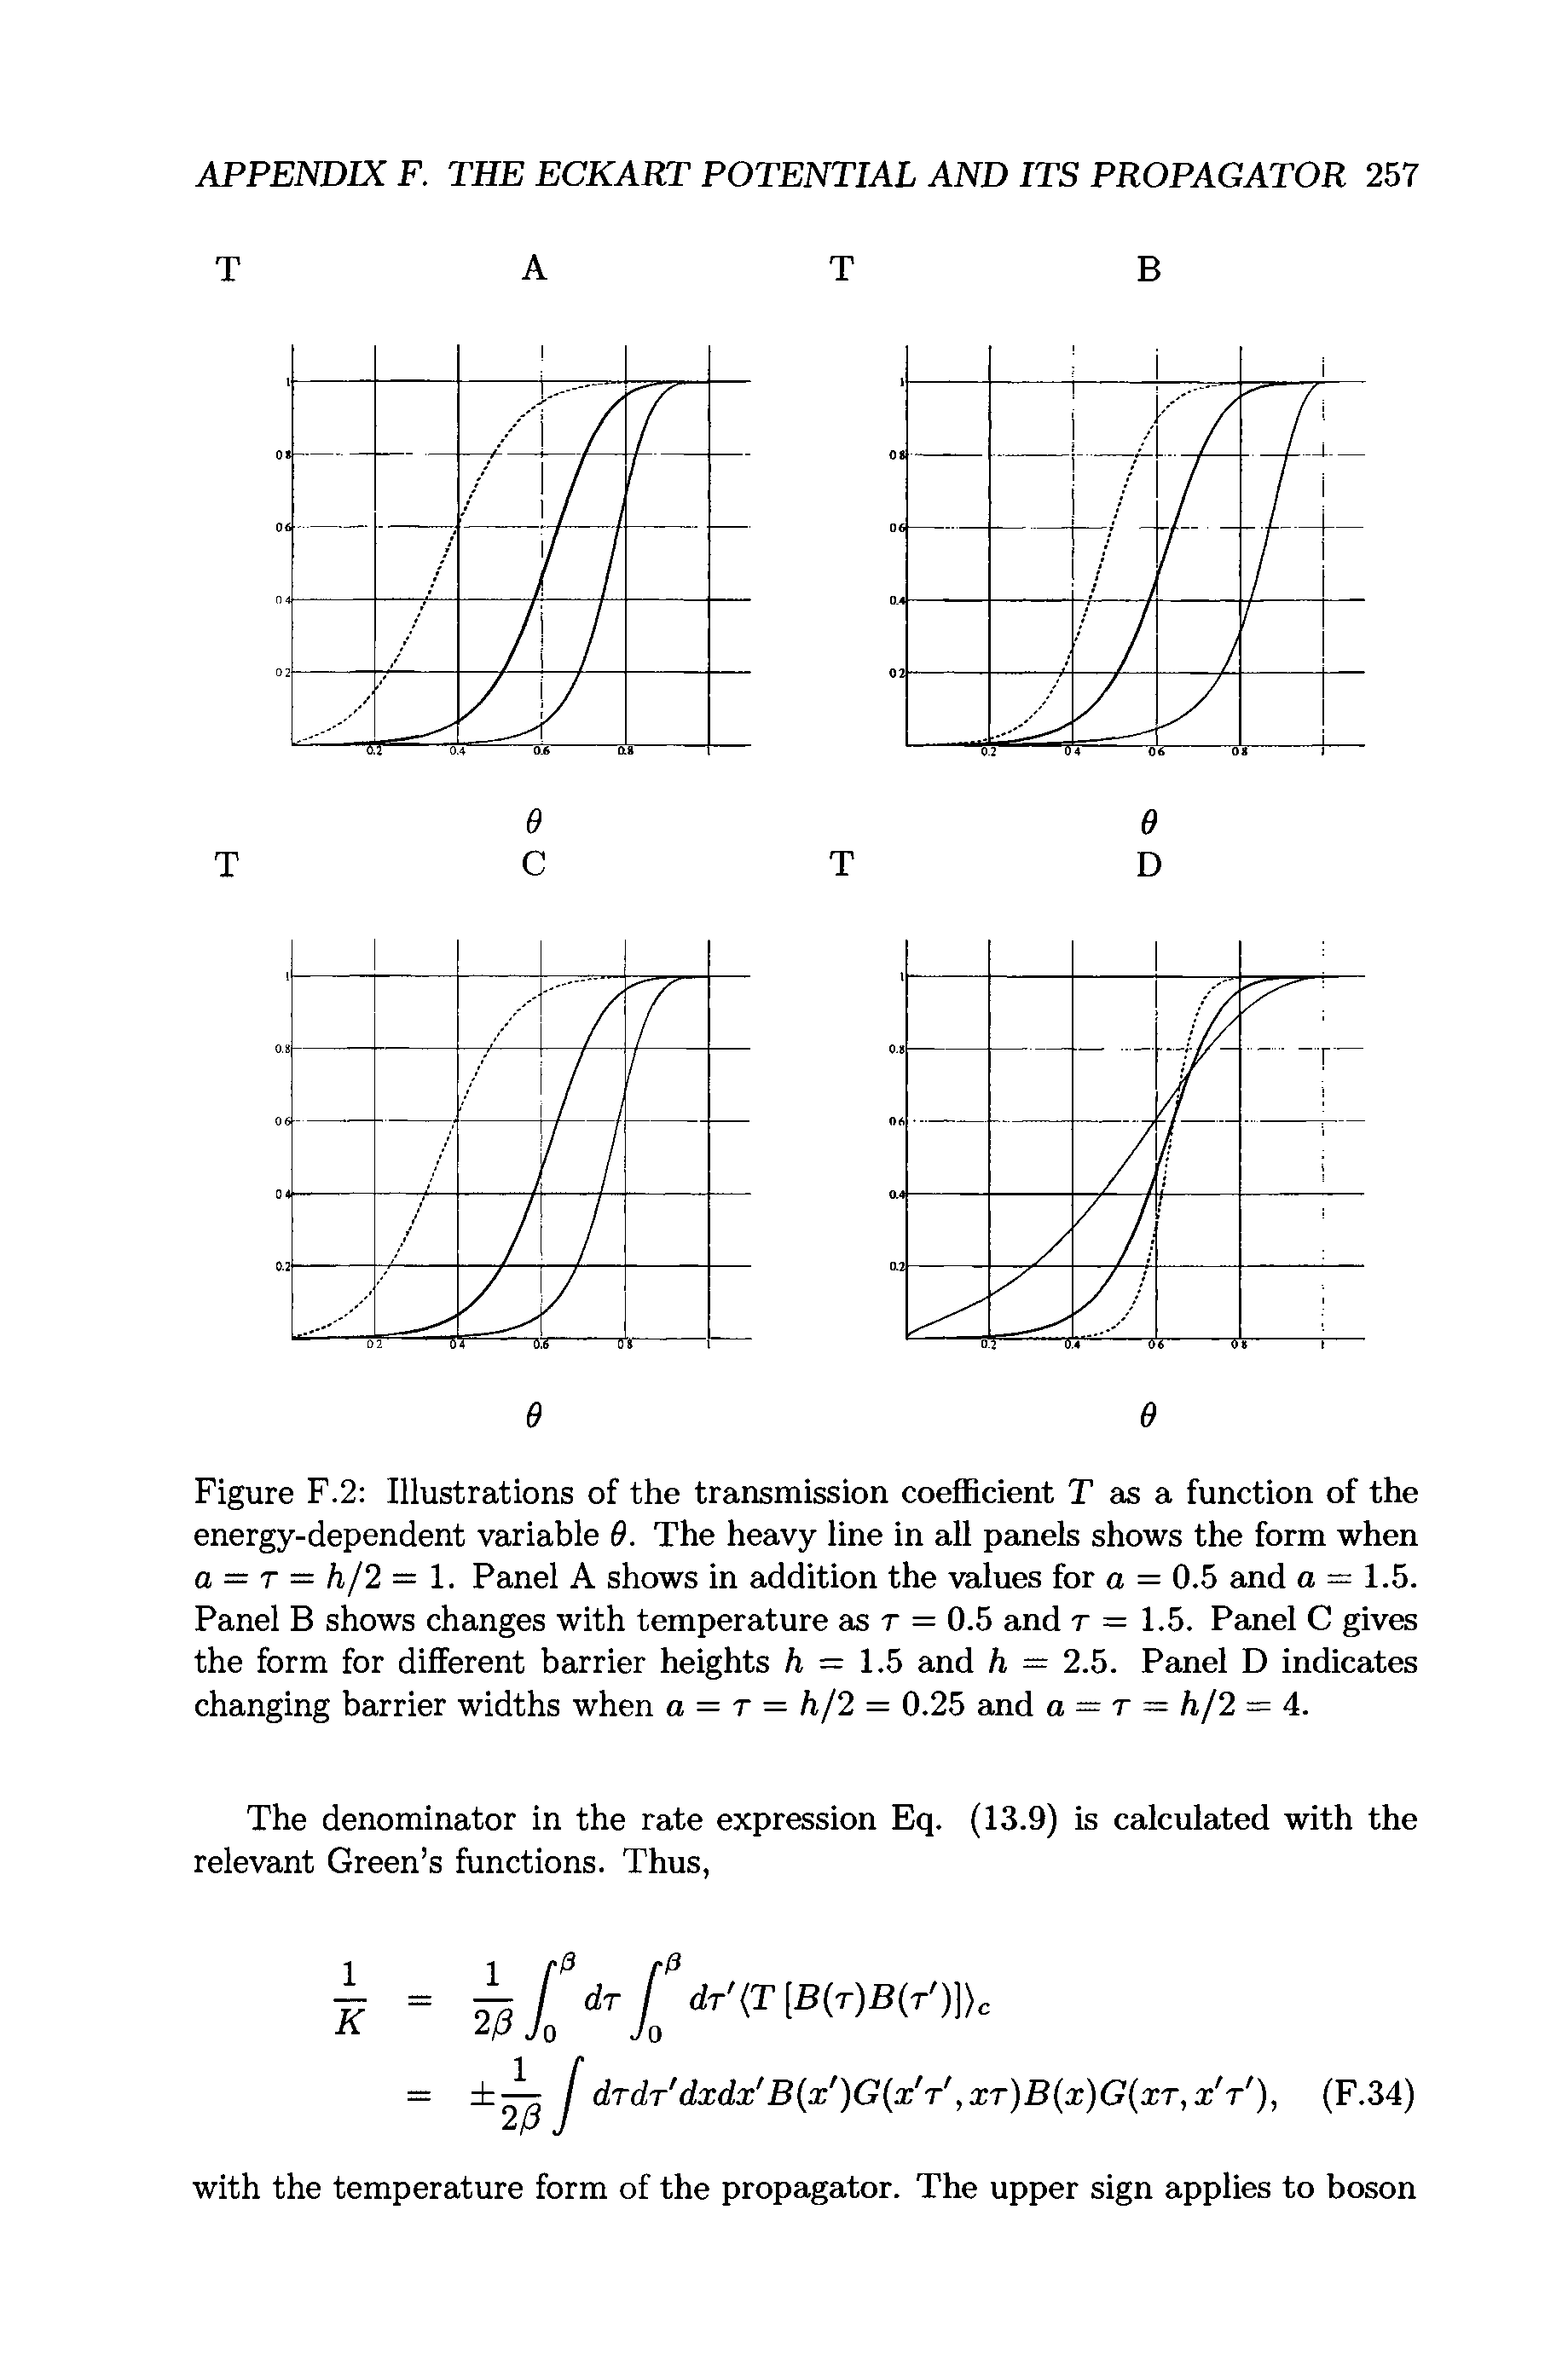 Figure F.2 Illustrations of the transmission coefficient T as a function of the energy-dependent variable 9. The heavy line in all panels shows the form when a = T = hf2 = 1. Panel A shows in addition the values for a = 0.5 and a = 1.5. Panel B shows changes with temperature as r = 0.5 and r = 1.5. Panel C gives the form for different barrier heights /i = 1.5 and h = 2.5. Panel D indicates changing barrier widths when a = t = h/2 = 0.25 and a — T — h/2 = 4.